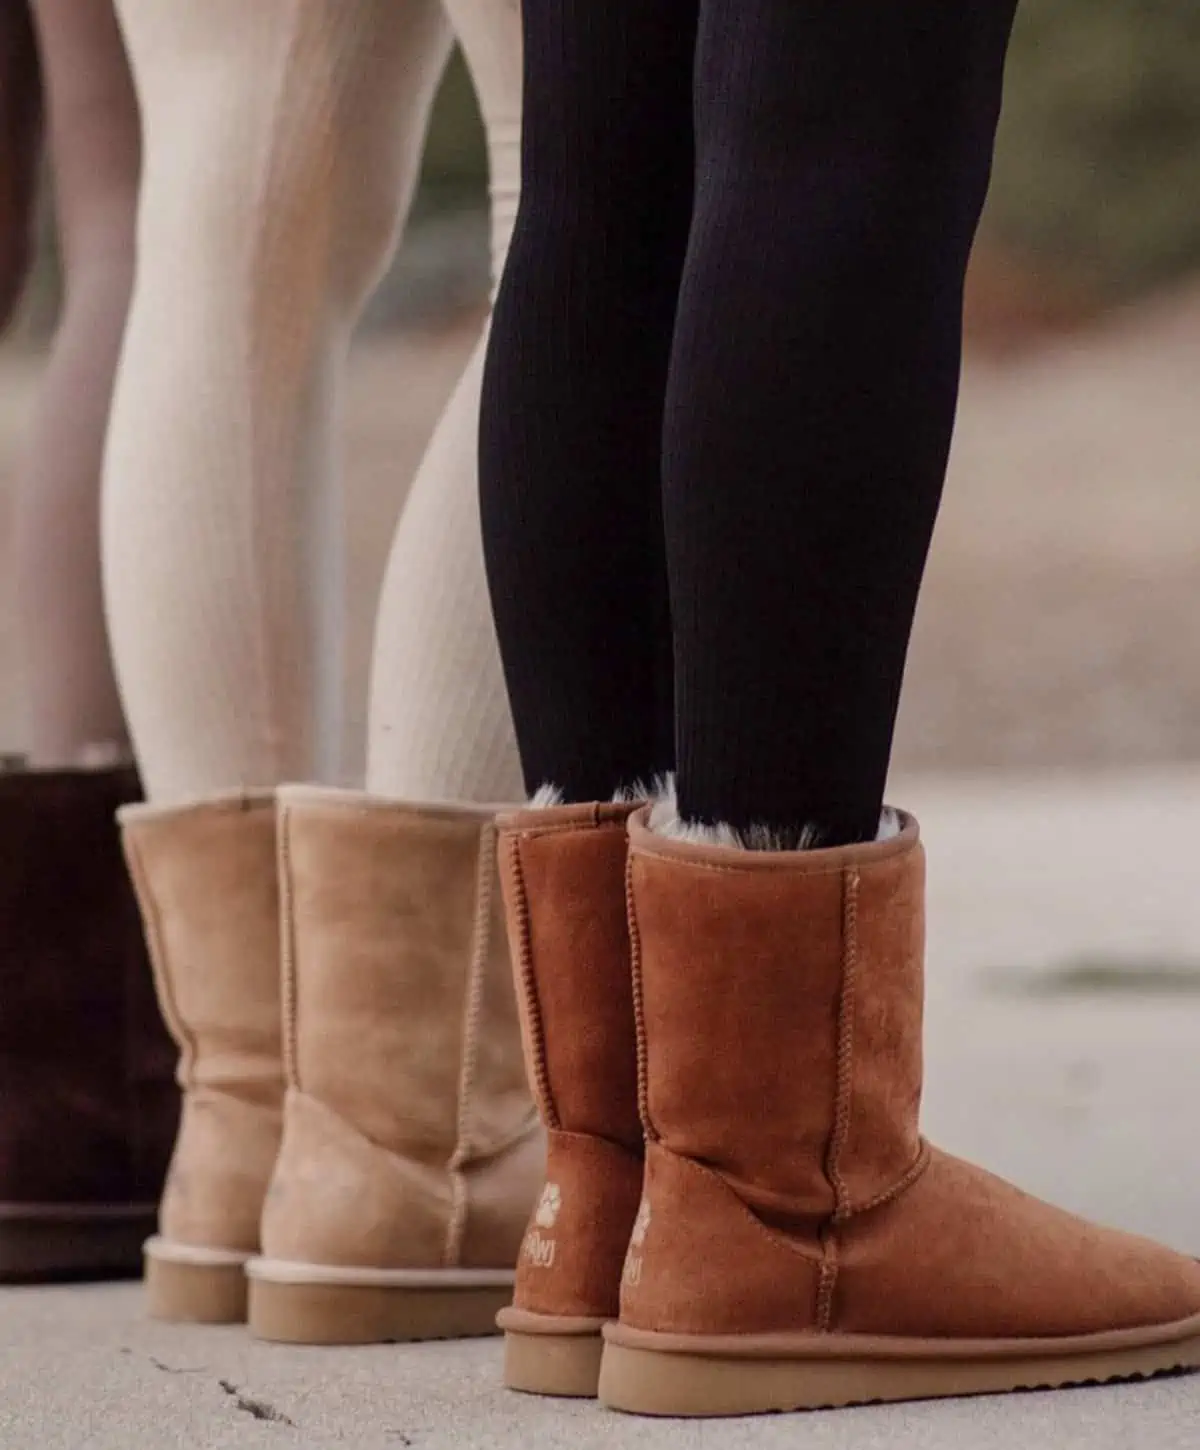 three woman wearing Pawj vegan ugg boots in colors tan and dark brown